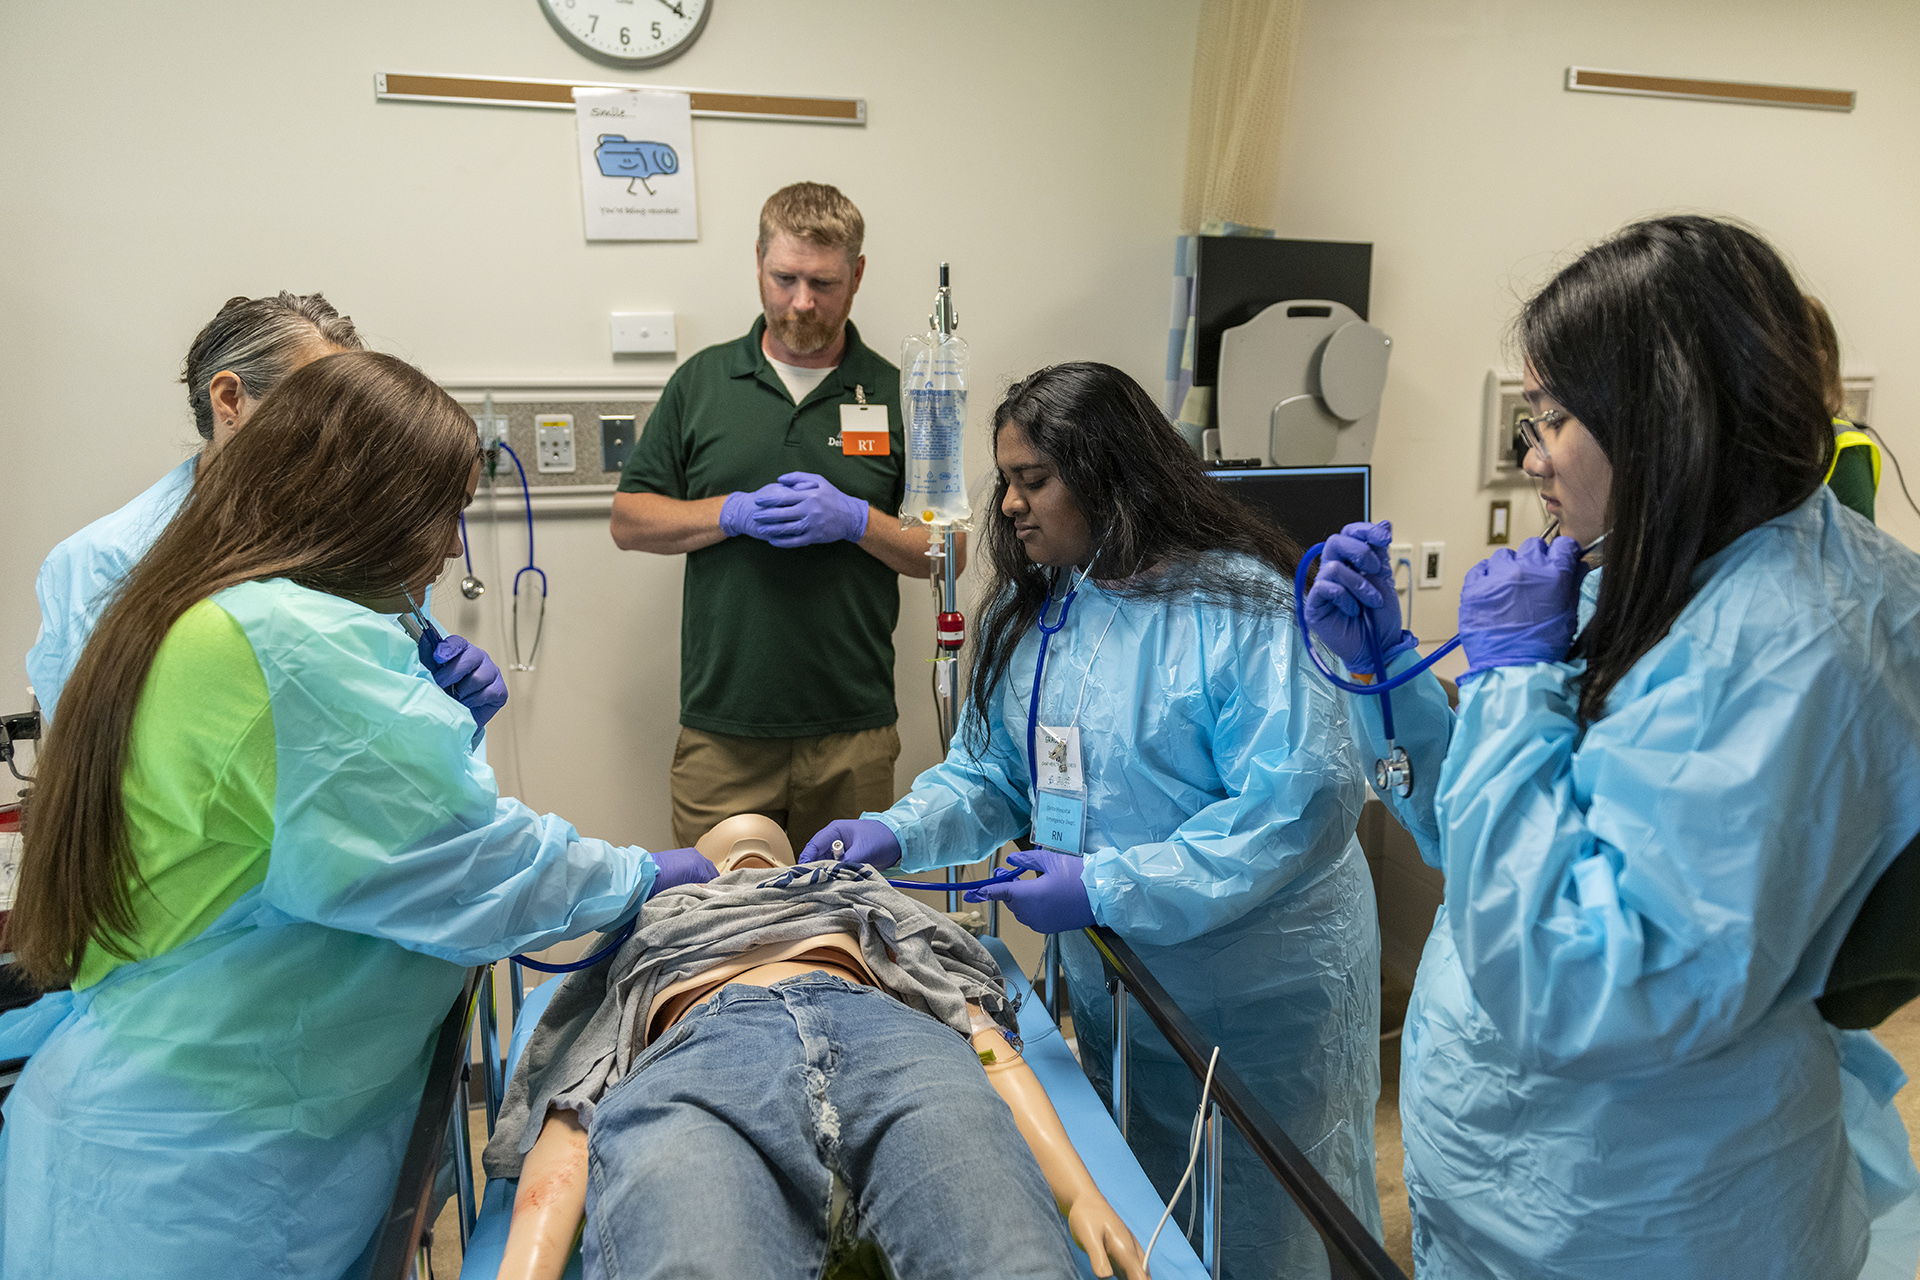 Students in blue surgical gowns stand around a stretcher with a mannequin